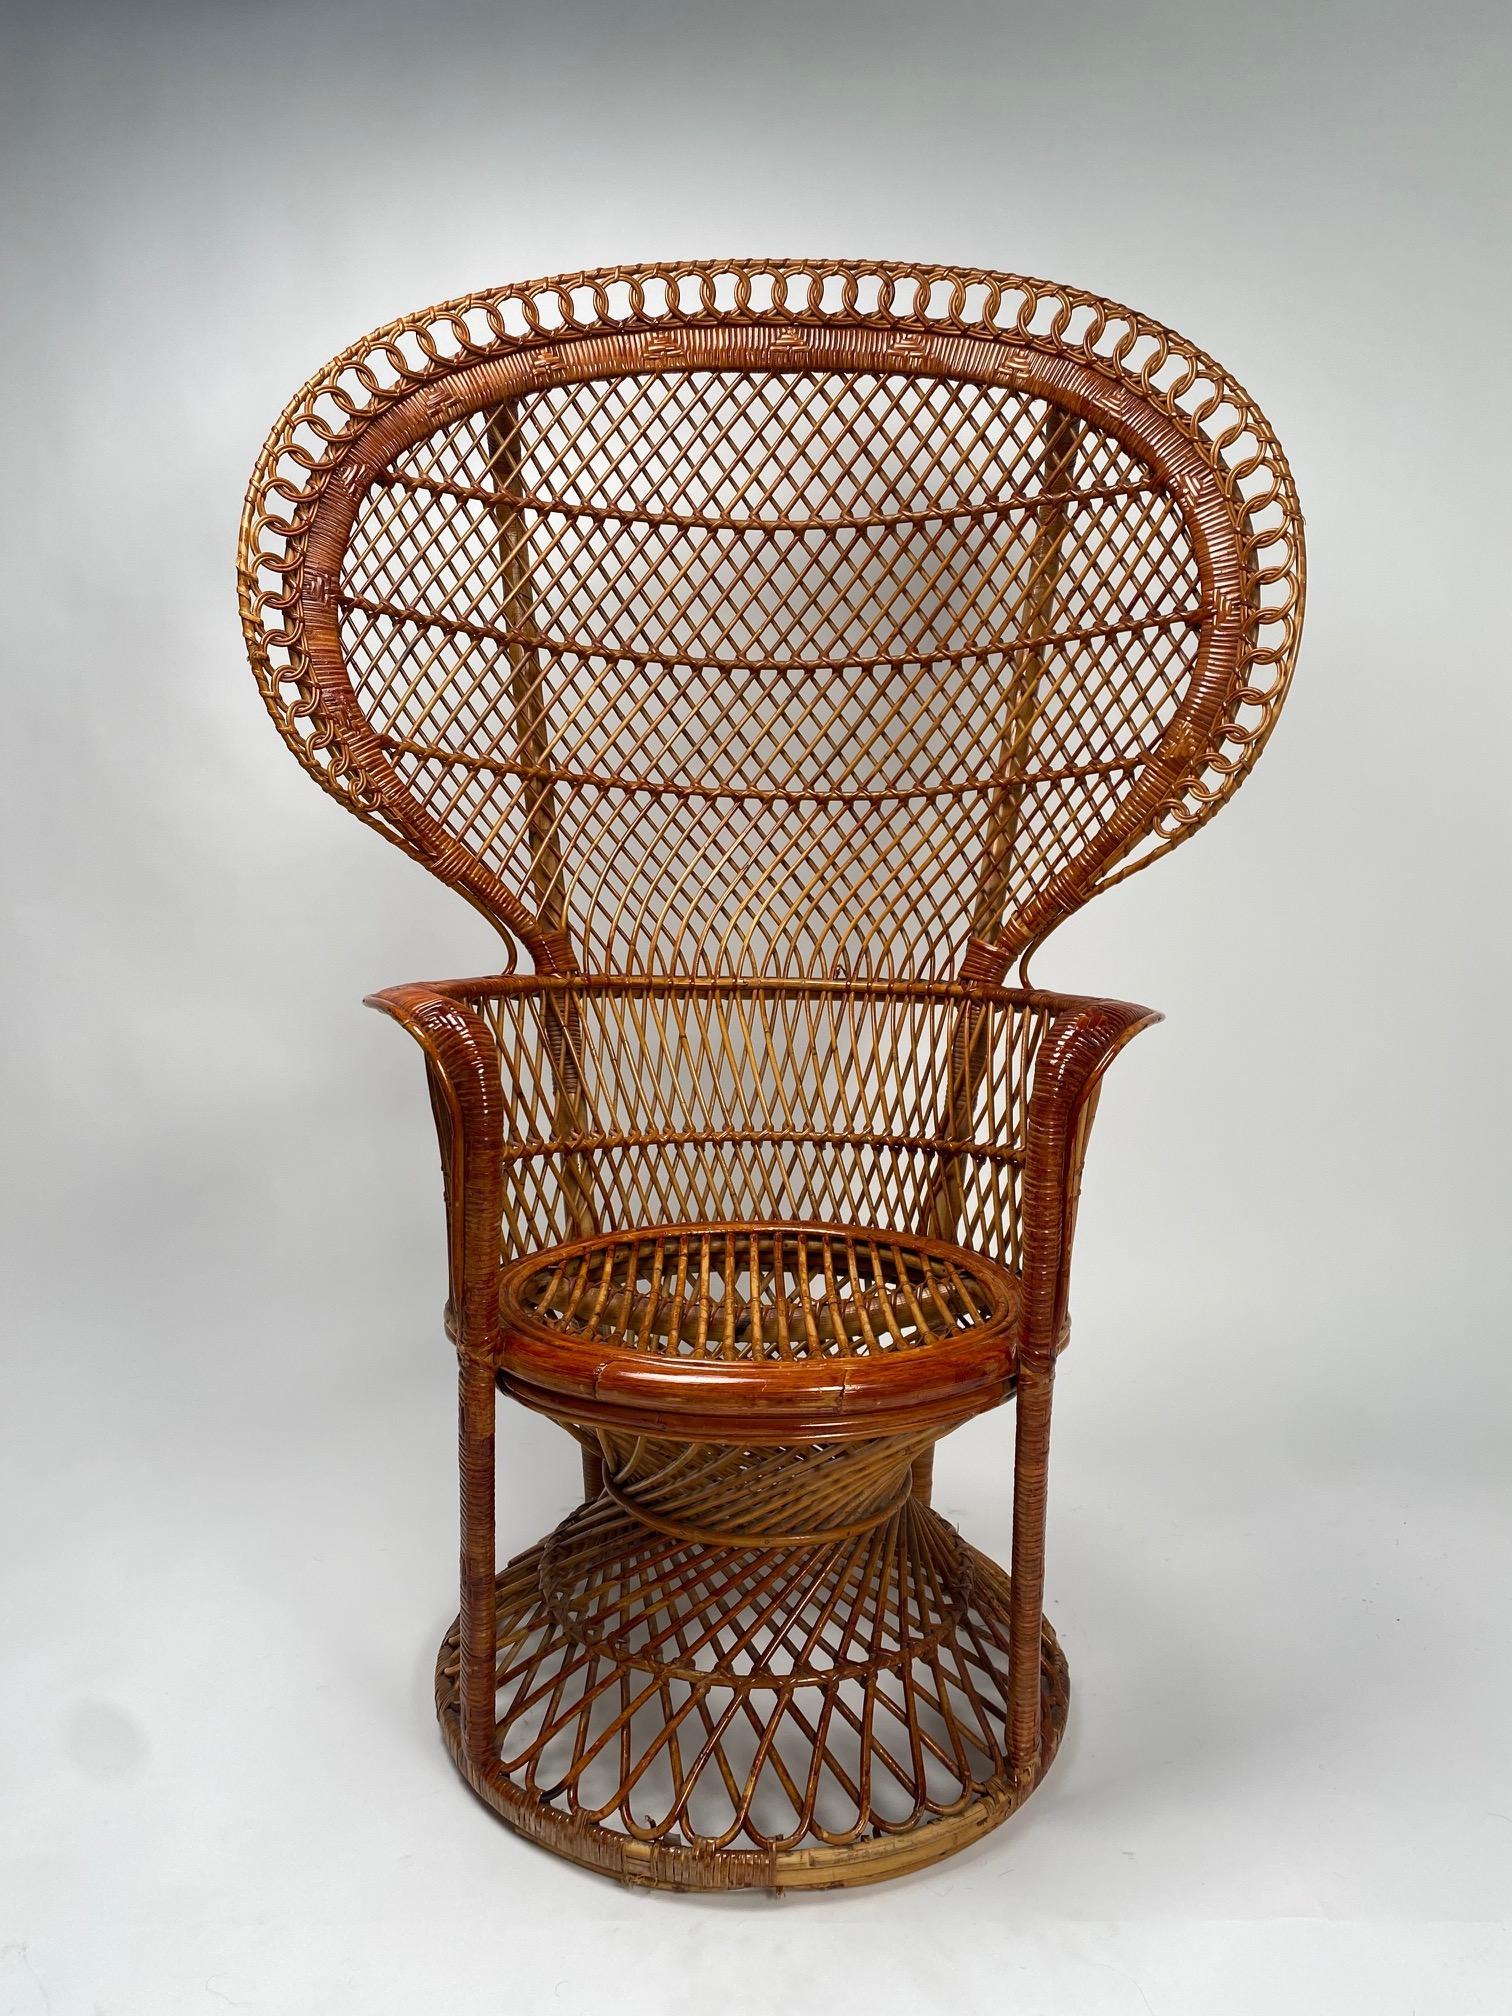 Monumental Pair of Pavone wicker armchairs, Italy, 1970s

It is one of the most iconic models among designer wicker armchairs. It reproduces the shapes of a large peacock, hence the name 